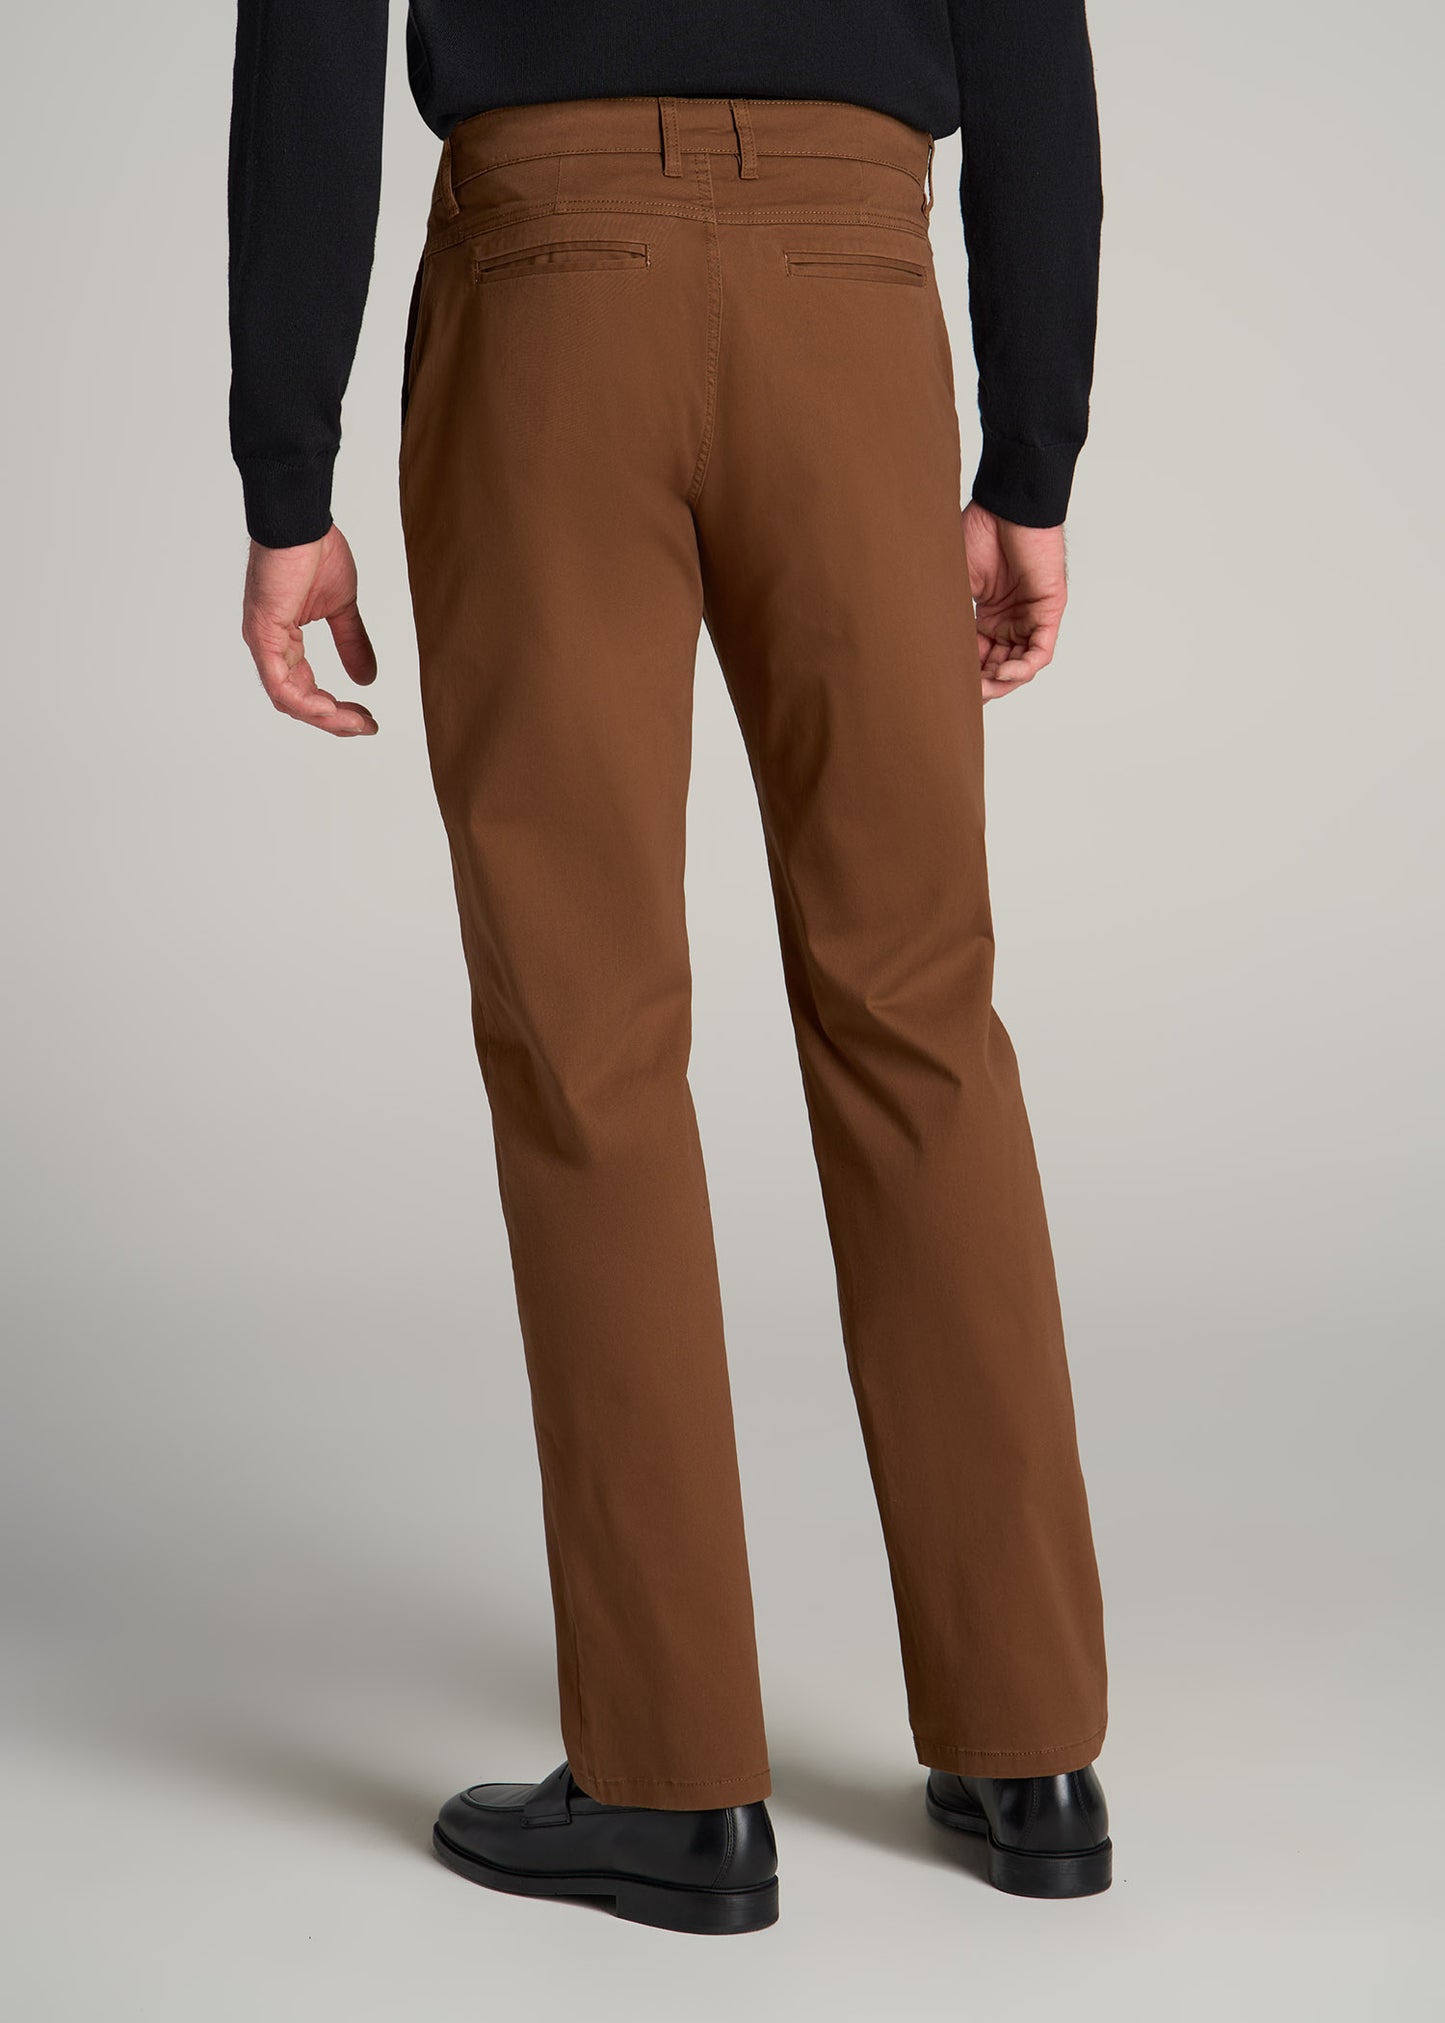 Mason RELAXED Chinos in Nutshell - Pants for Tall Men